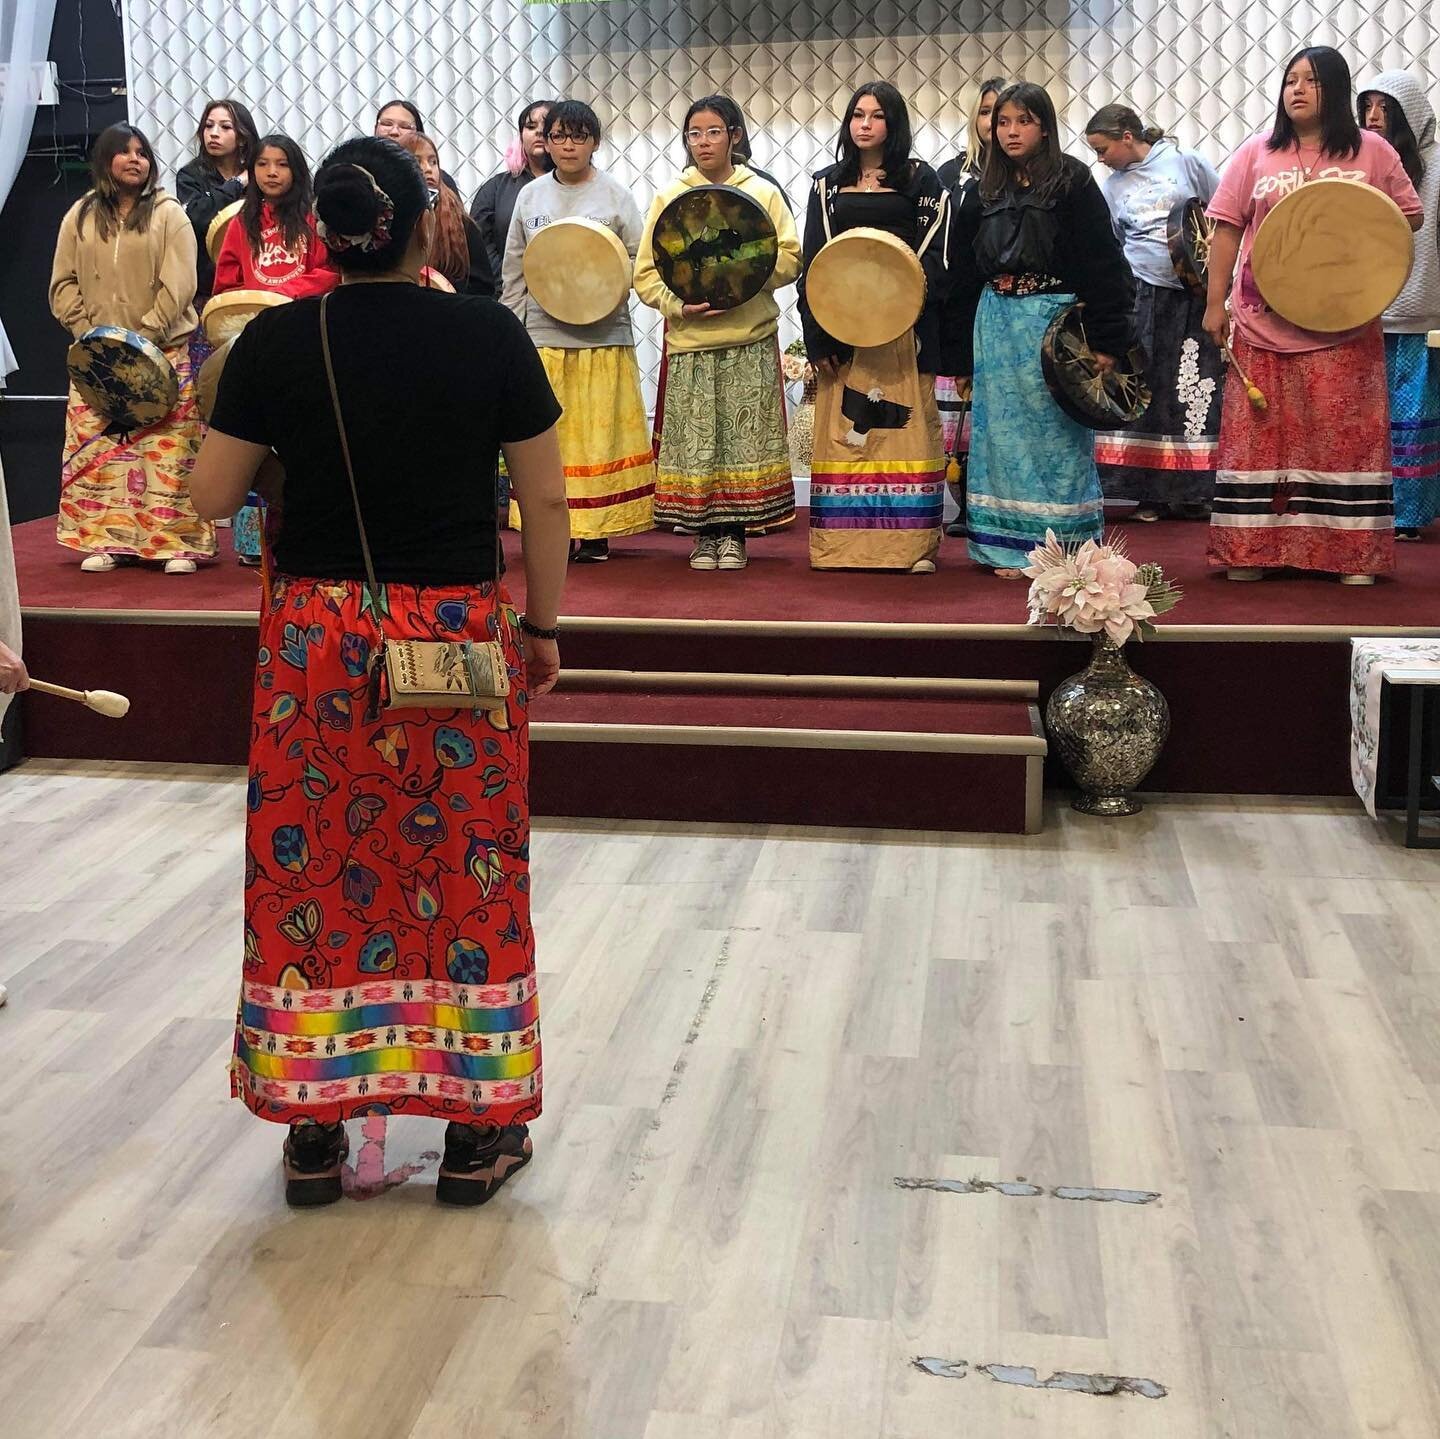 I think music in itself is healing. It's an explosive expression of humanity. - Billy Joel

Another drumming class for the Stardale girls! After their success performing at the Red Dress Day event on May 5th the girls are back to work working on thei